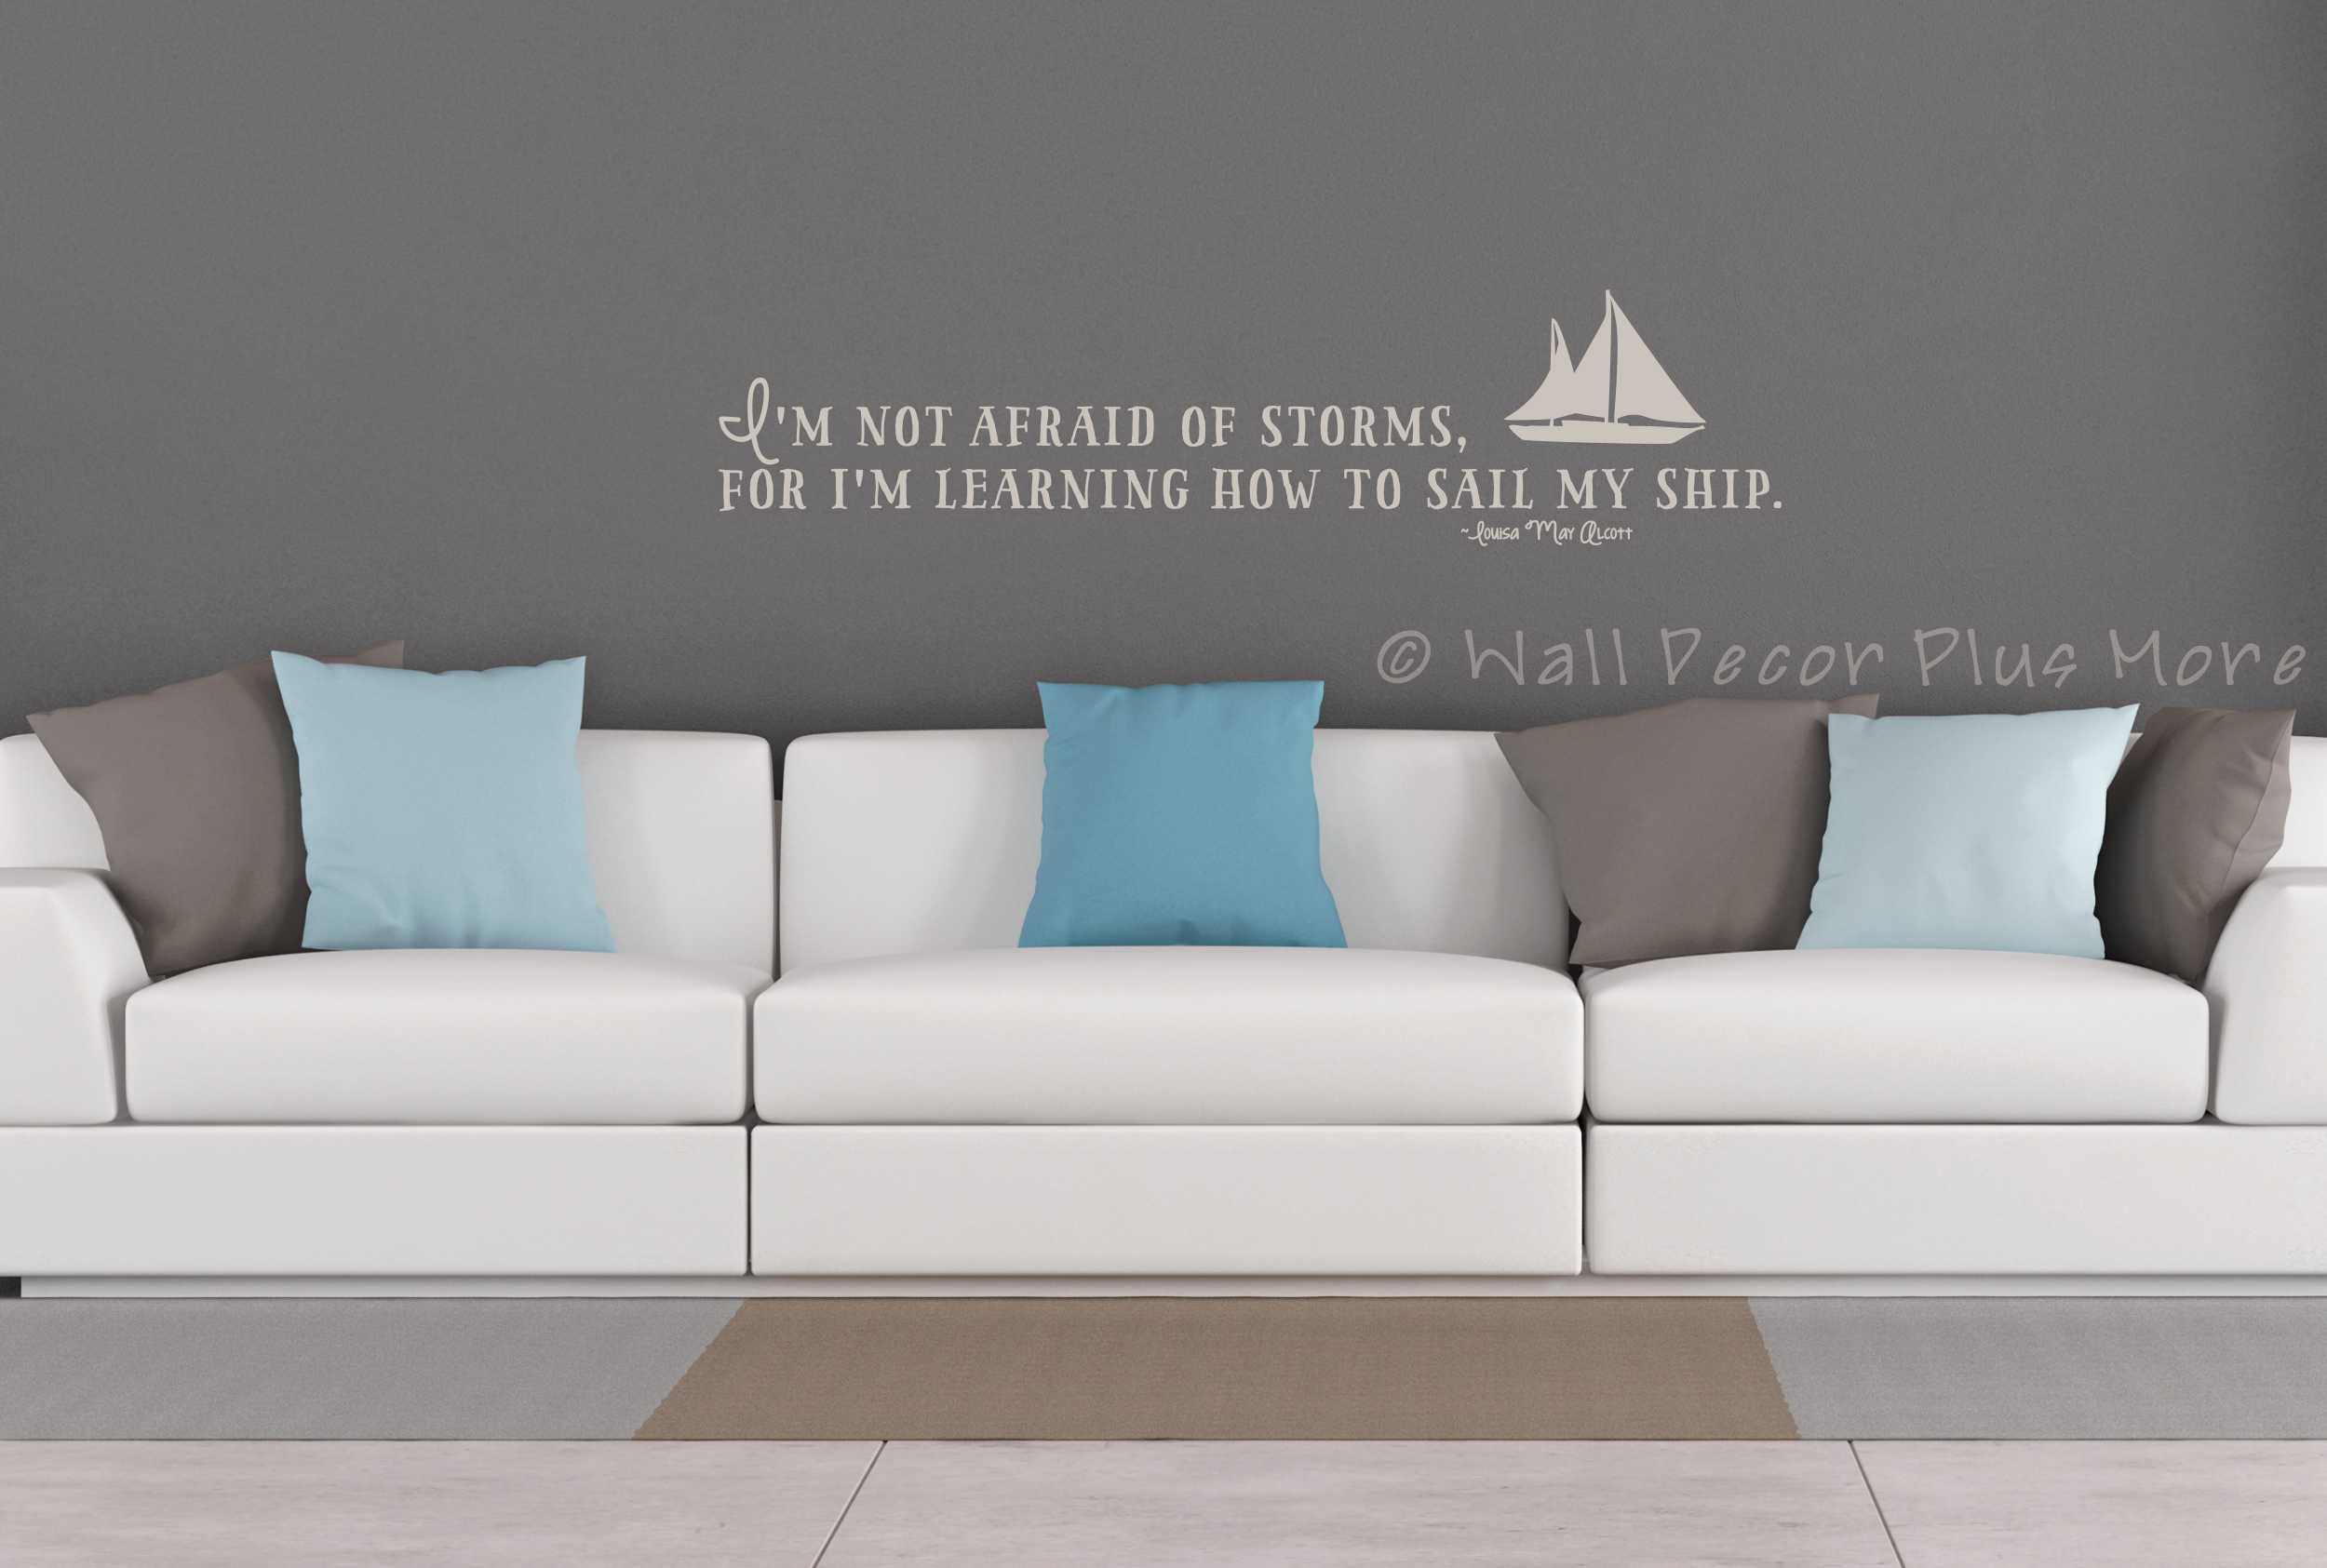 WD530 I'm Not Afraid of Storms, for I'm learning to sail my ship Wall Decal Stickers